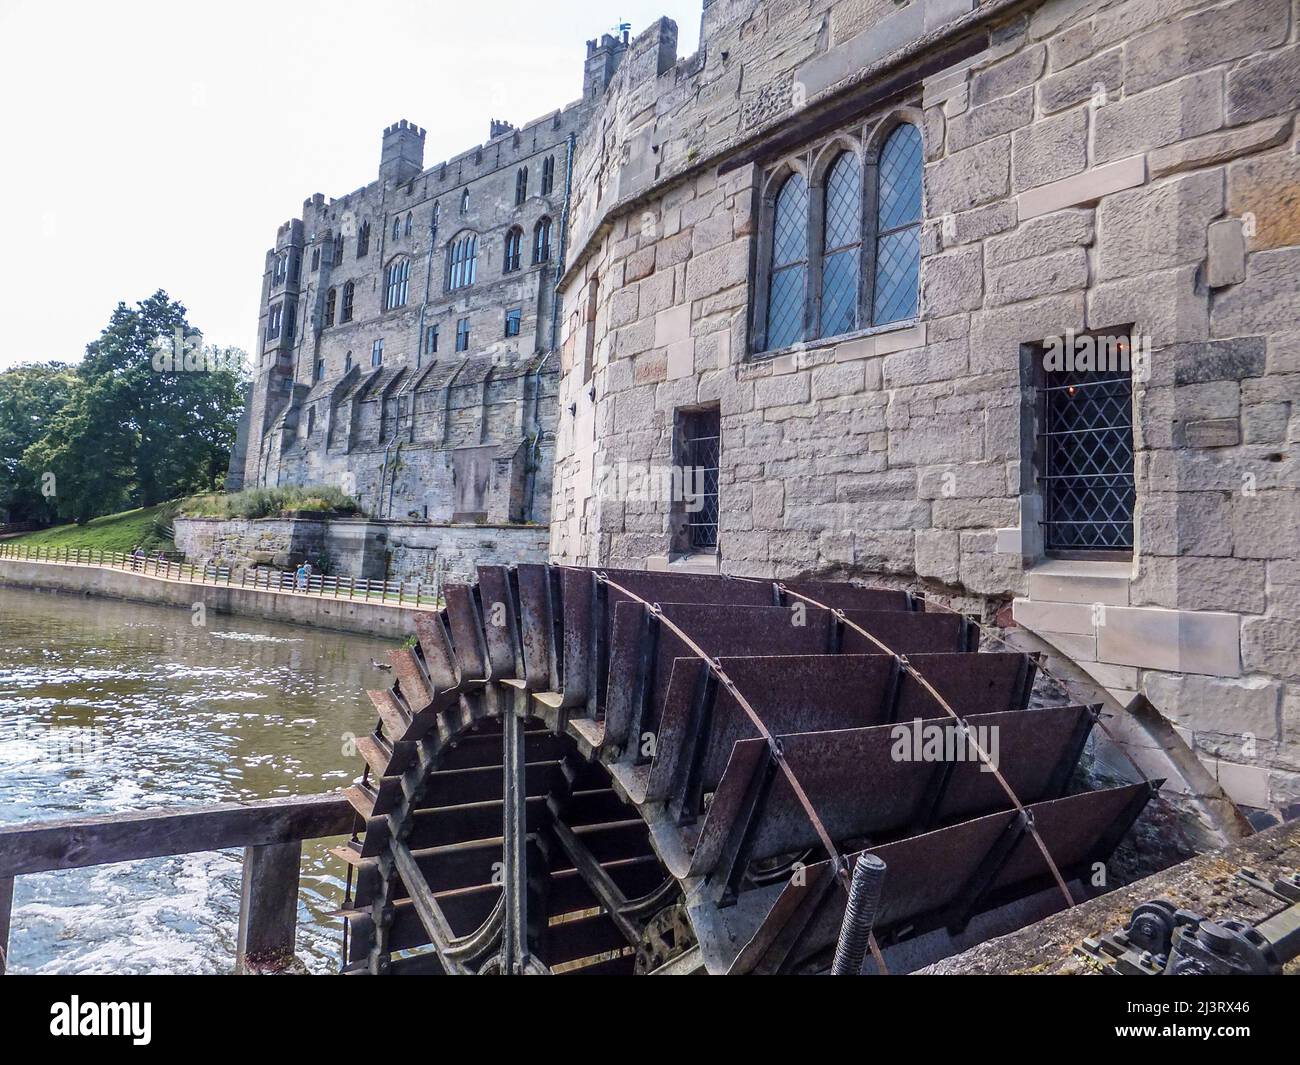 The Castle Mill waterwheel at medieval Warwick Castle on the River Avon in Warwickshire, England, UK. Stock Photo